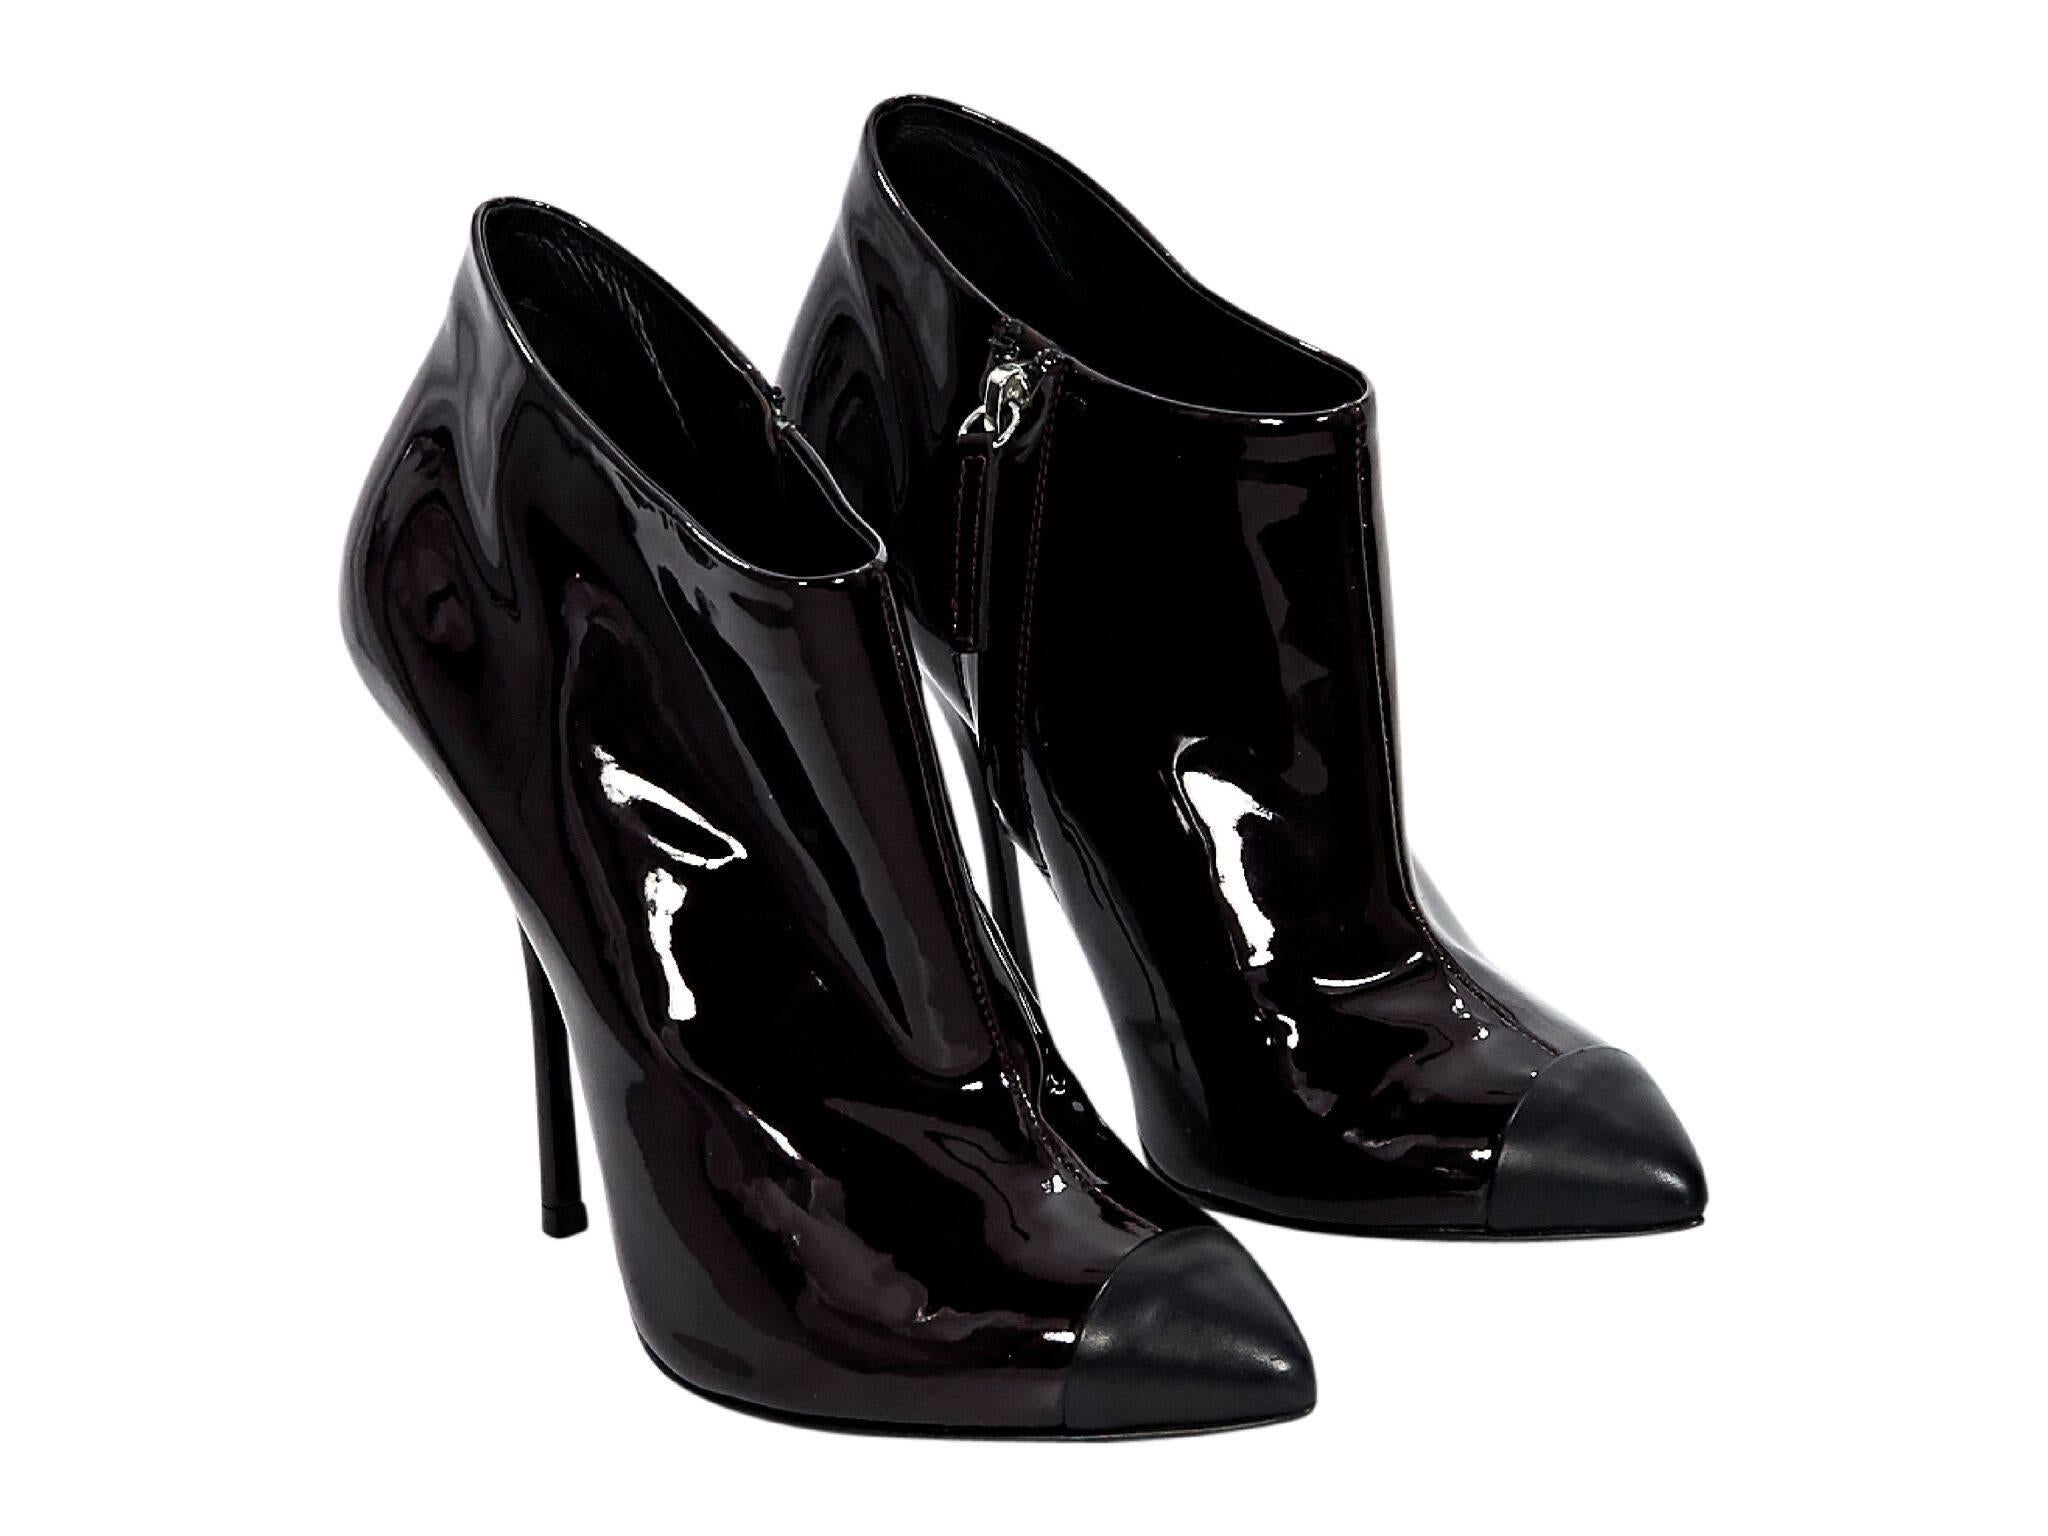 Product details:  Dark burgundy patent leather ankle boots by Giuseppe Zanotti.  Point cap toe.  Inner zip closure. 
Condition: Pre-owned. Very good. 
Est. Retail $1,095